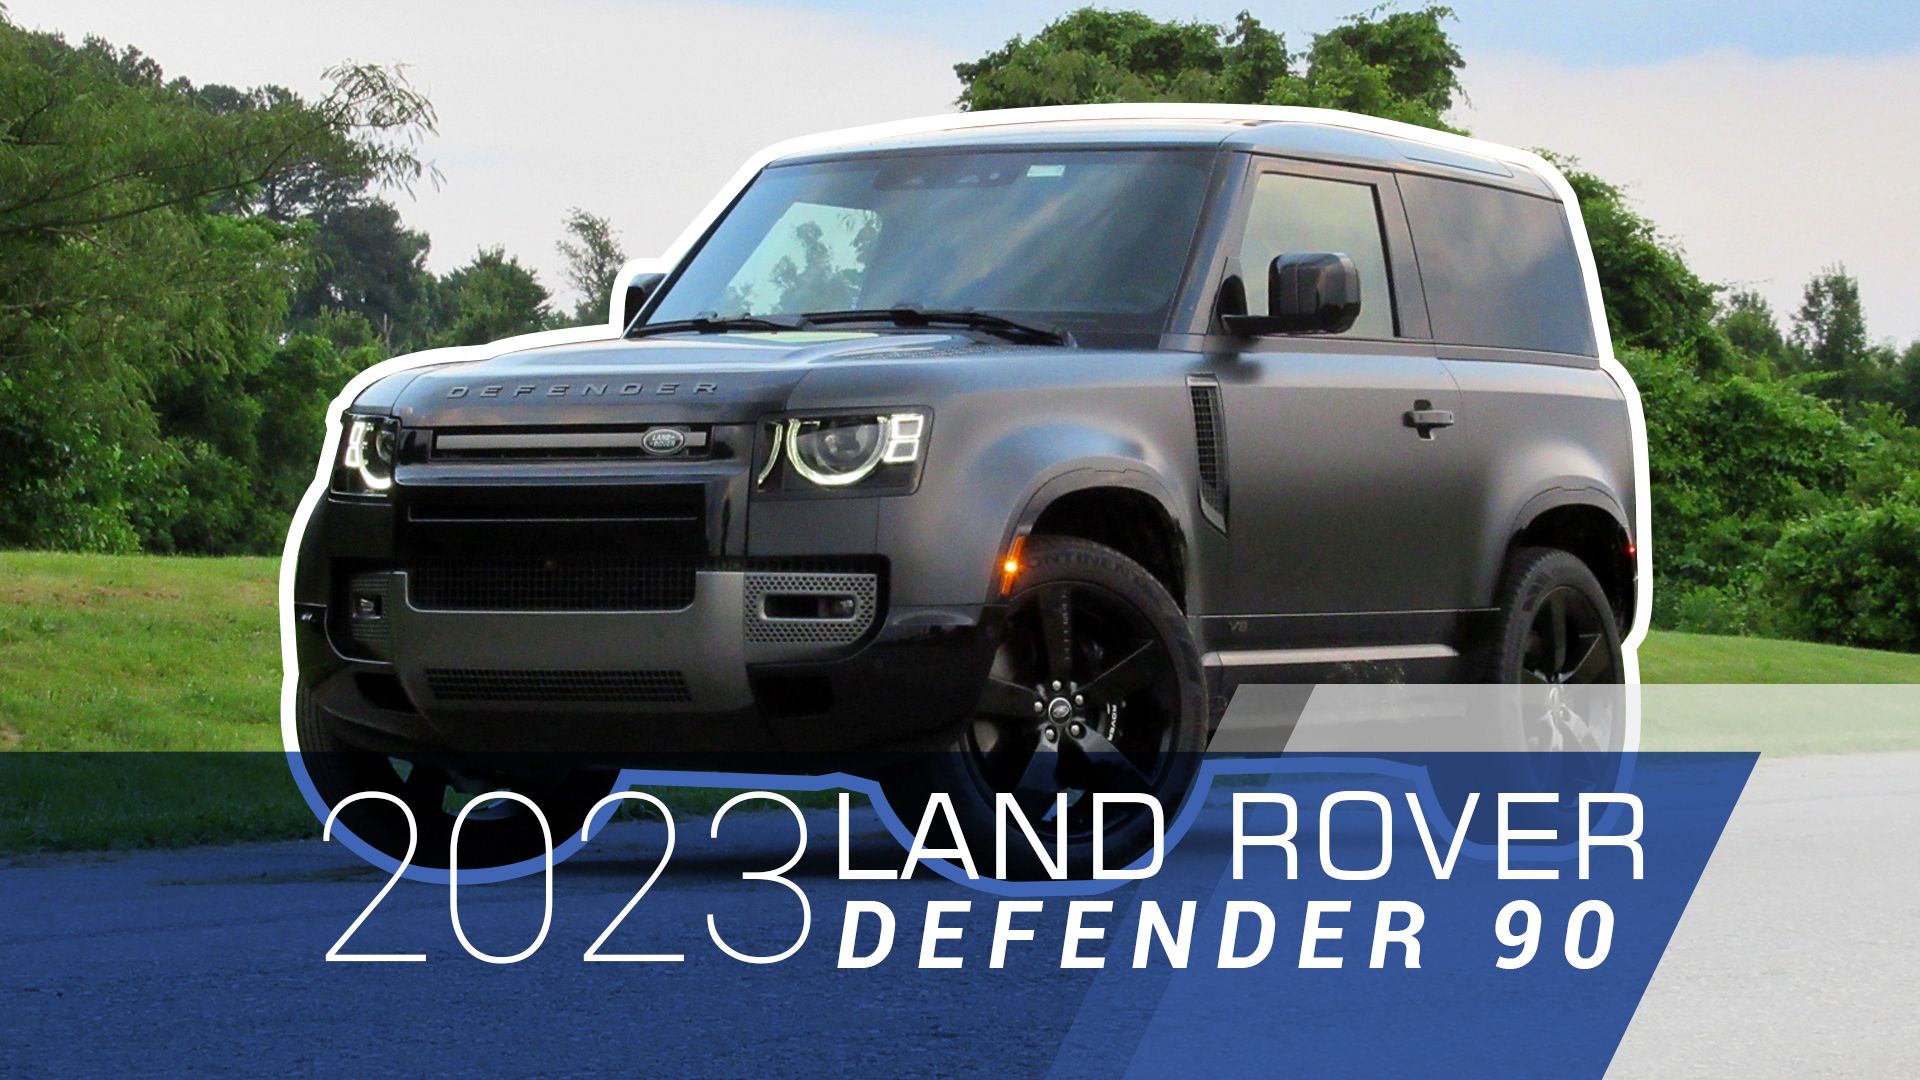 Review: The 2022 Land Rover Defender 90 V8 is the last SUV of its kind